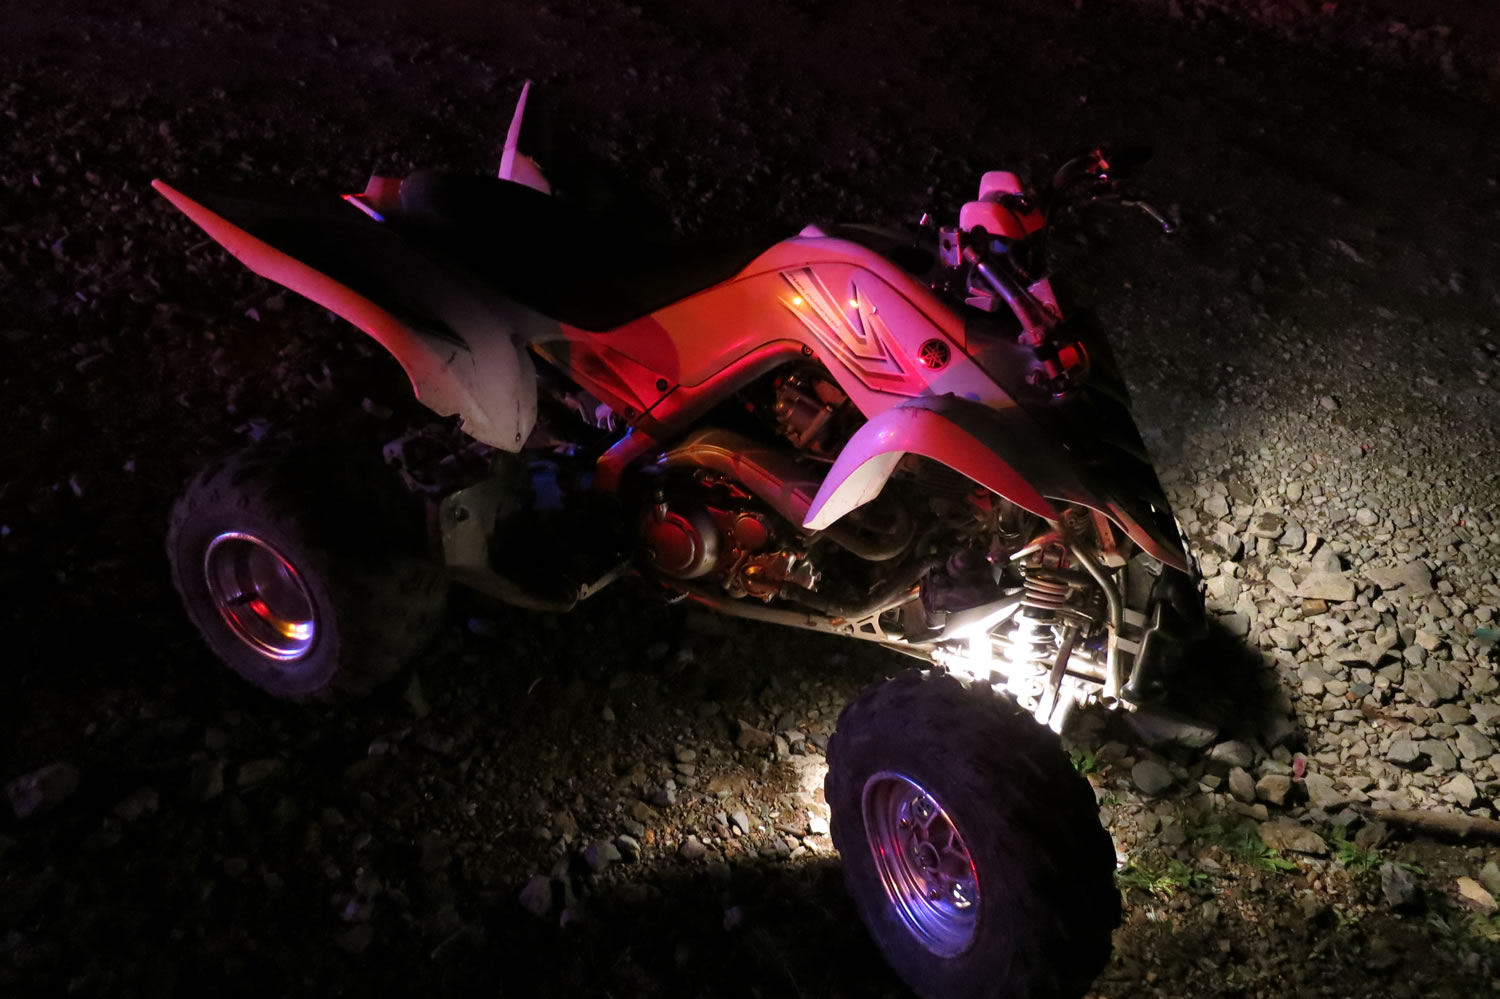 An ATV rider was critically injured Saturday when the vehicle went out of control and flipped on Larch Mountain.